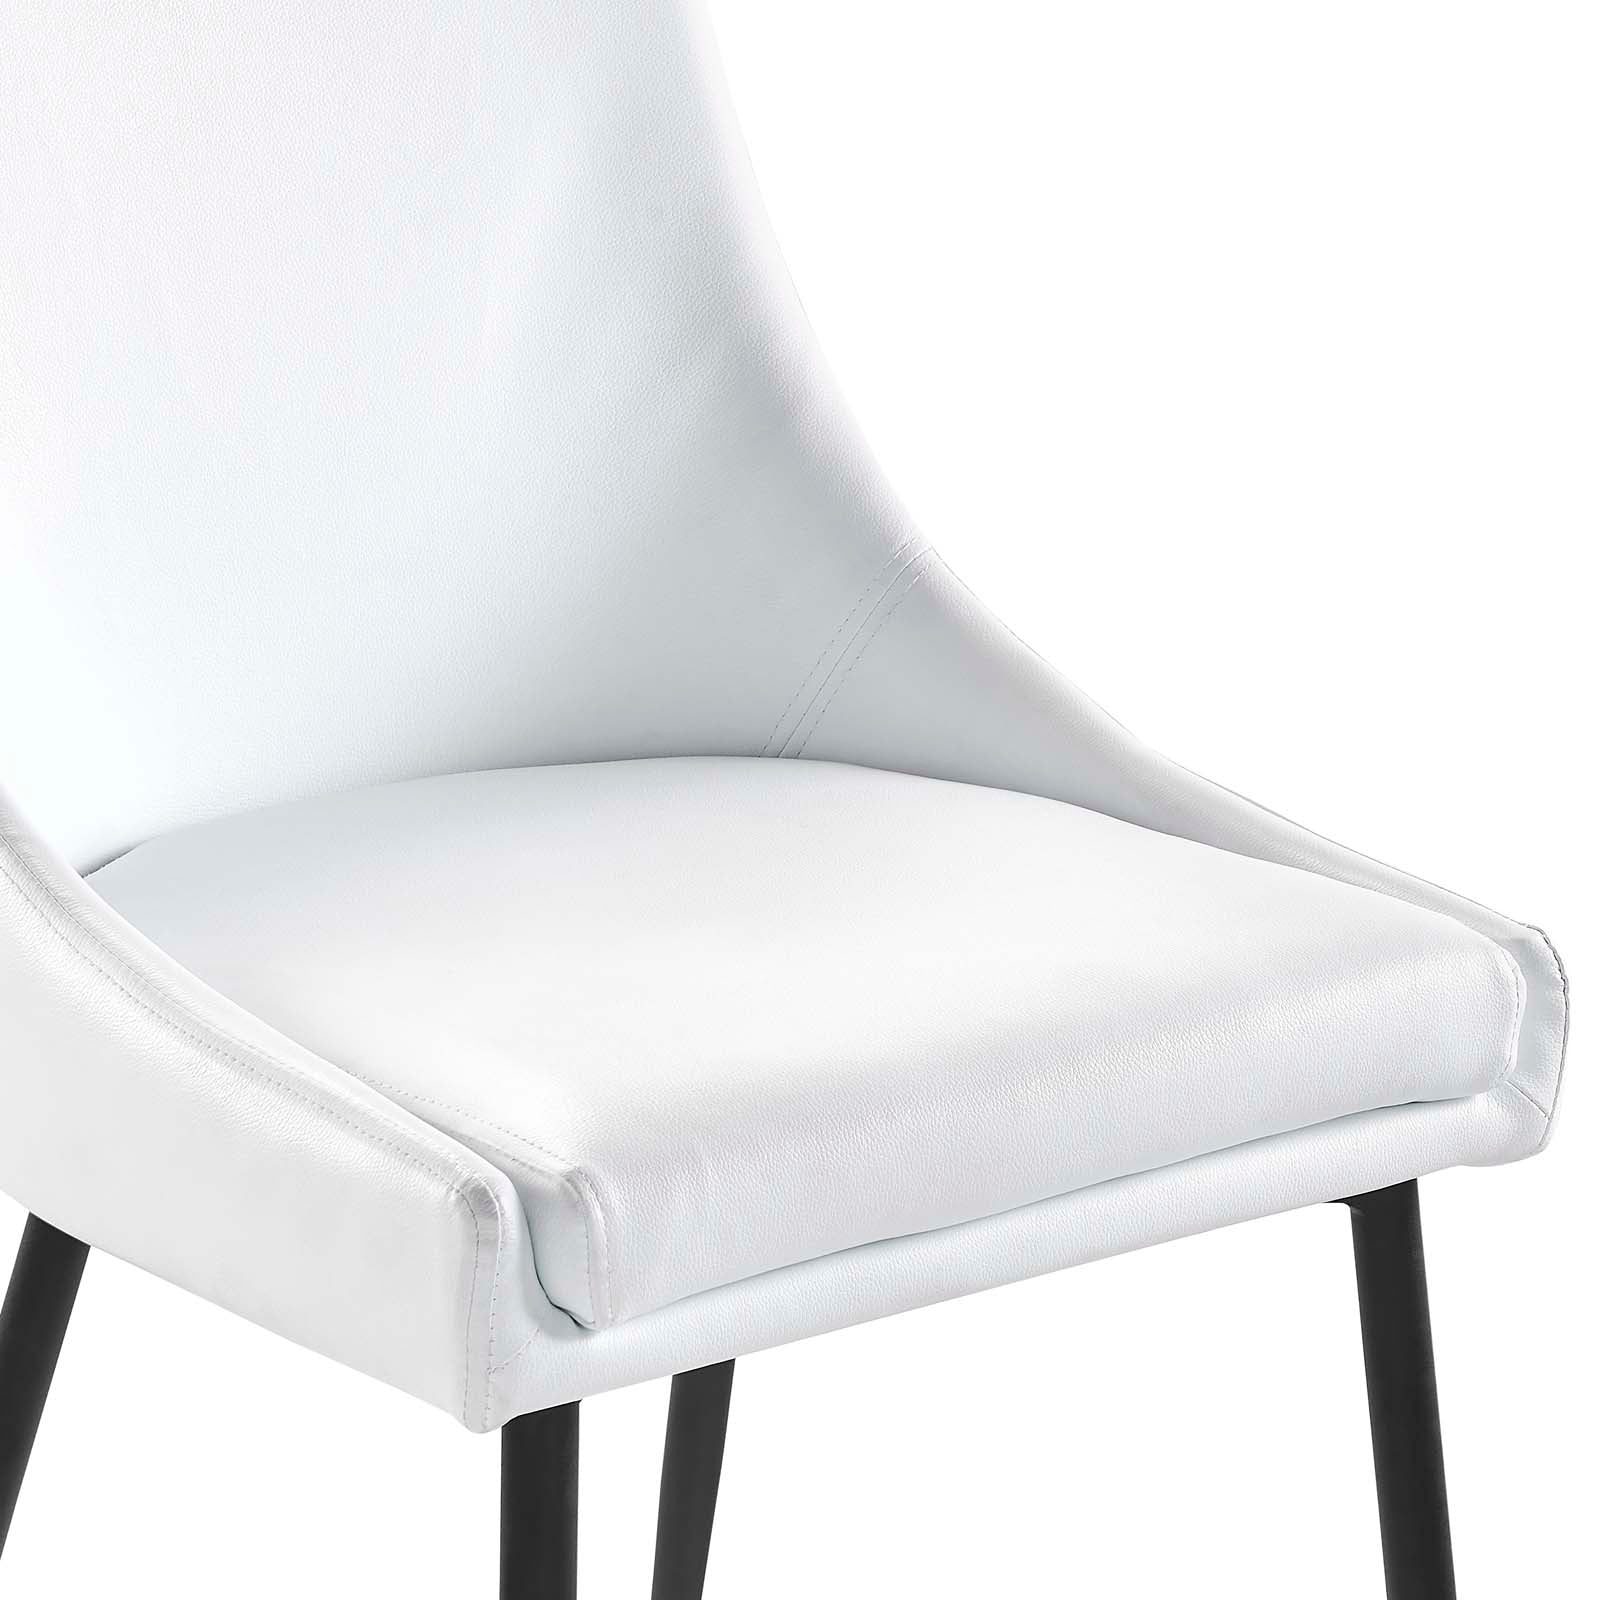 Modway Dining Chairs - Viscount Vegan Leather Dining Chairs - Set Of 2 Black White